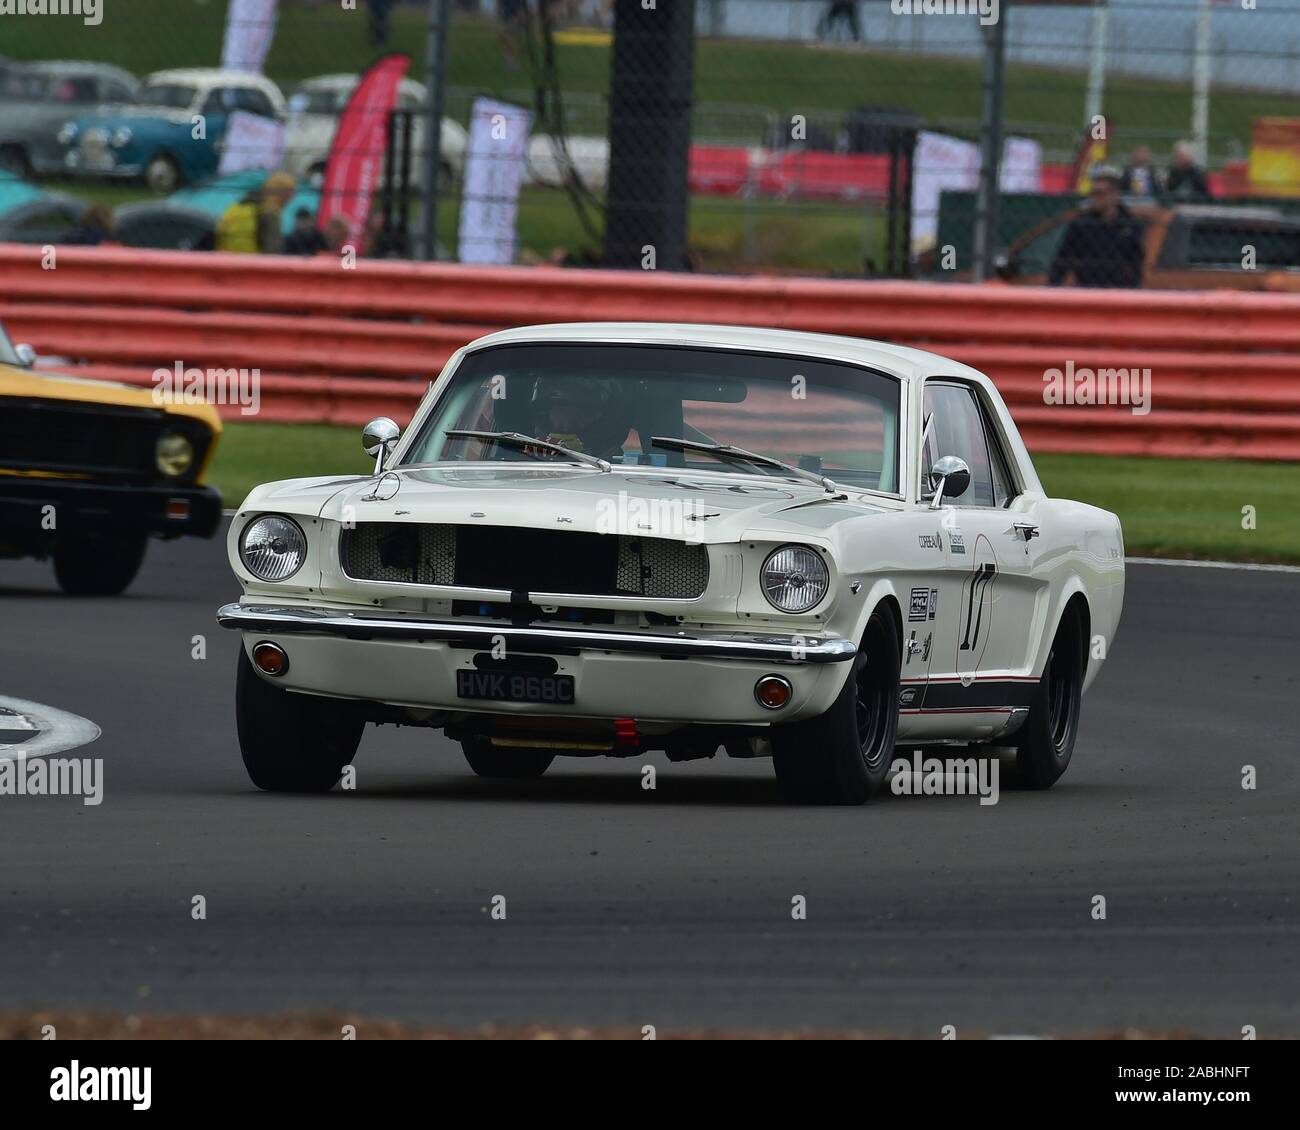 David Bartrum, Michael Caine, Ford Mustang, Transatlantic Trophy for Pre '66 Touring Cars, Silverstone Classic, July 2019, Silverstone, Northamptonshi Stock Photo